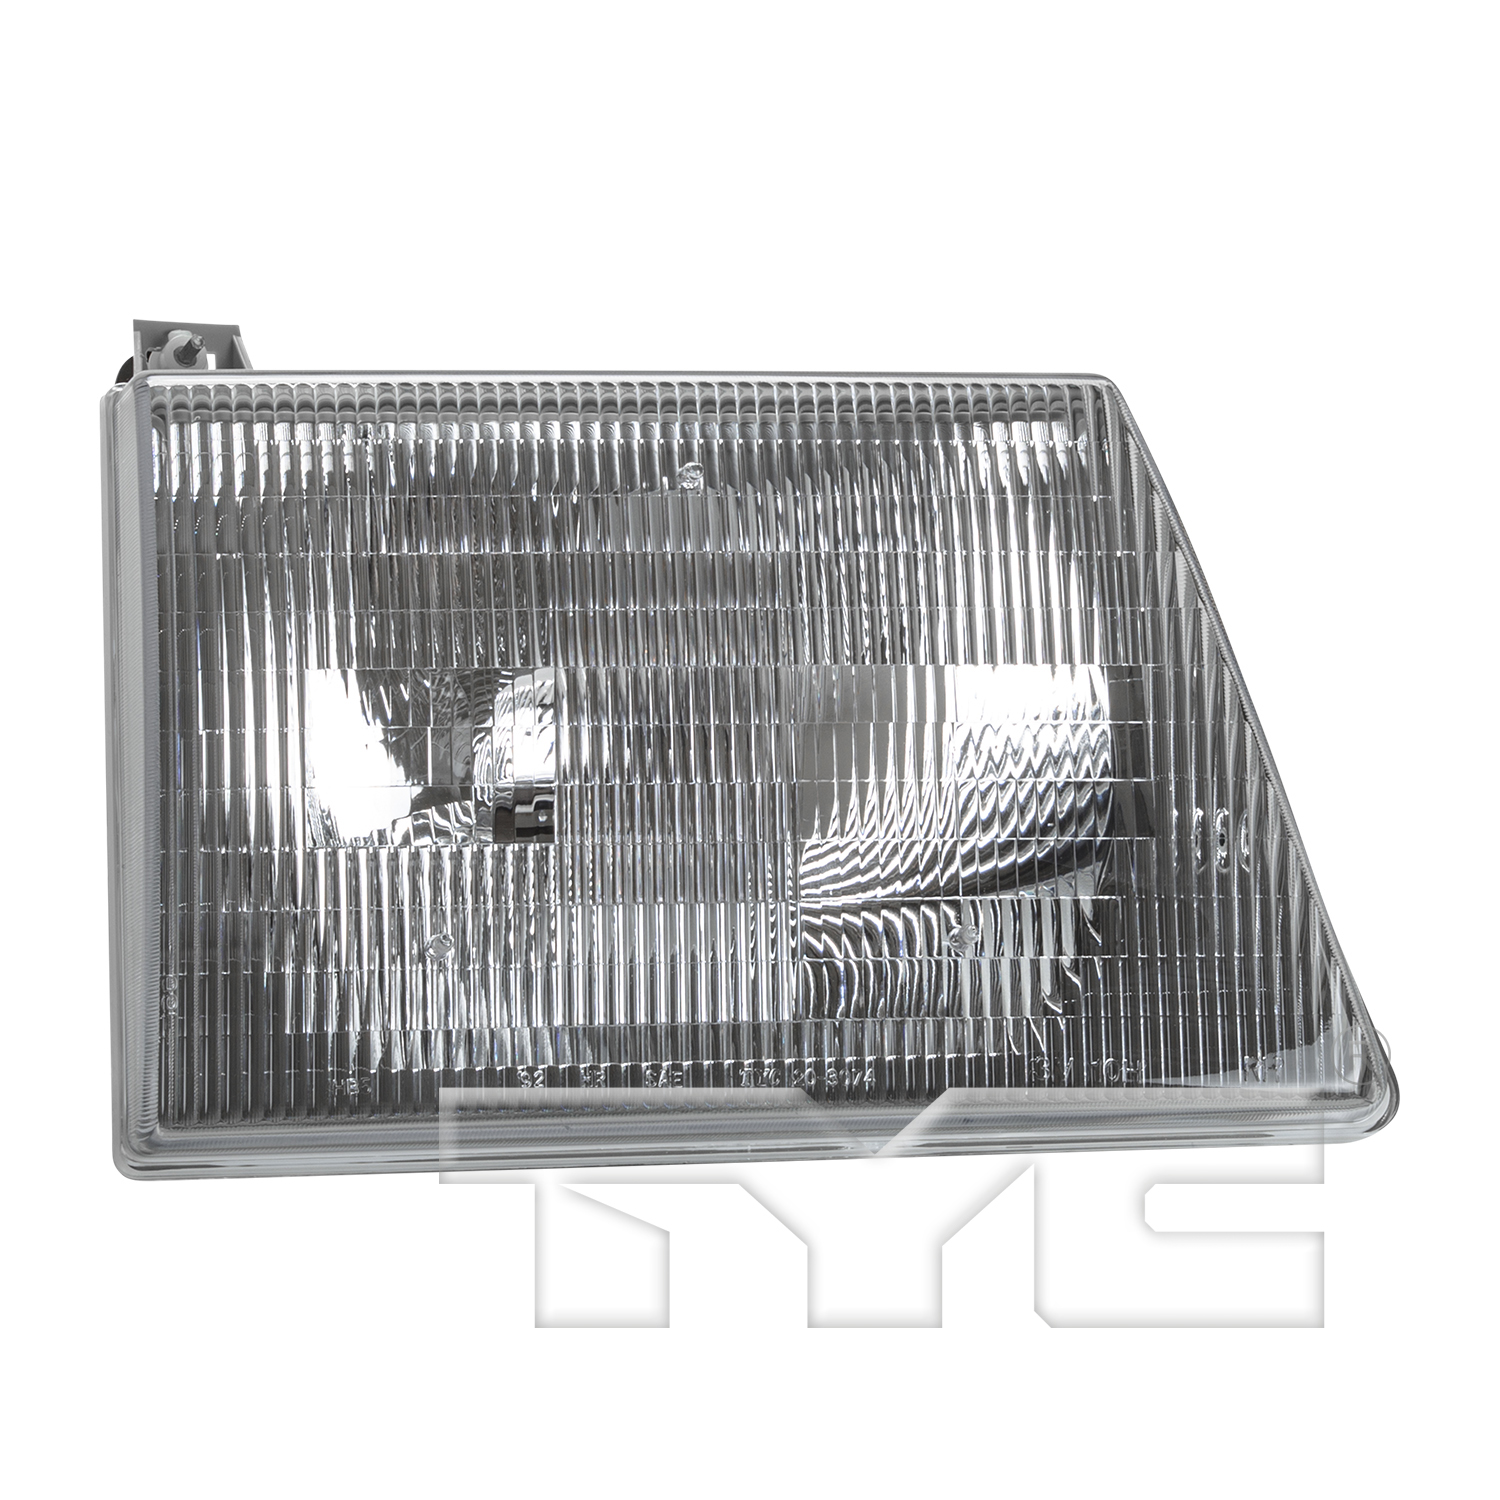 Aftermarket HEADLIGHTS for FORD - E-550 ECONOLINE SUPER DUTY, E-550 ECONOLINE SUPER DUTY,02-02,RT Headlamp assy composite